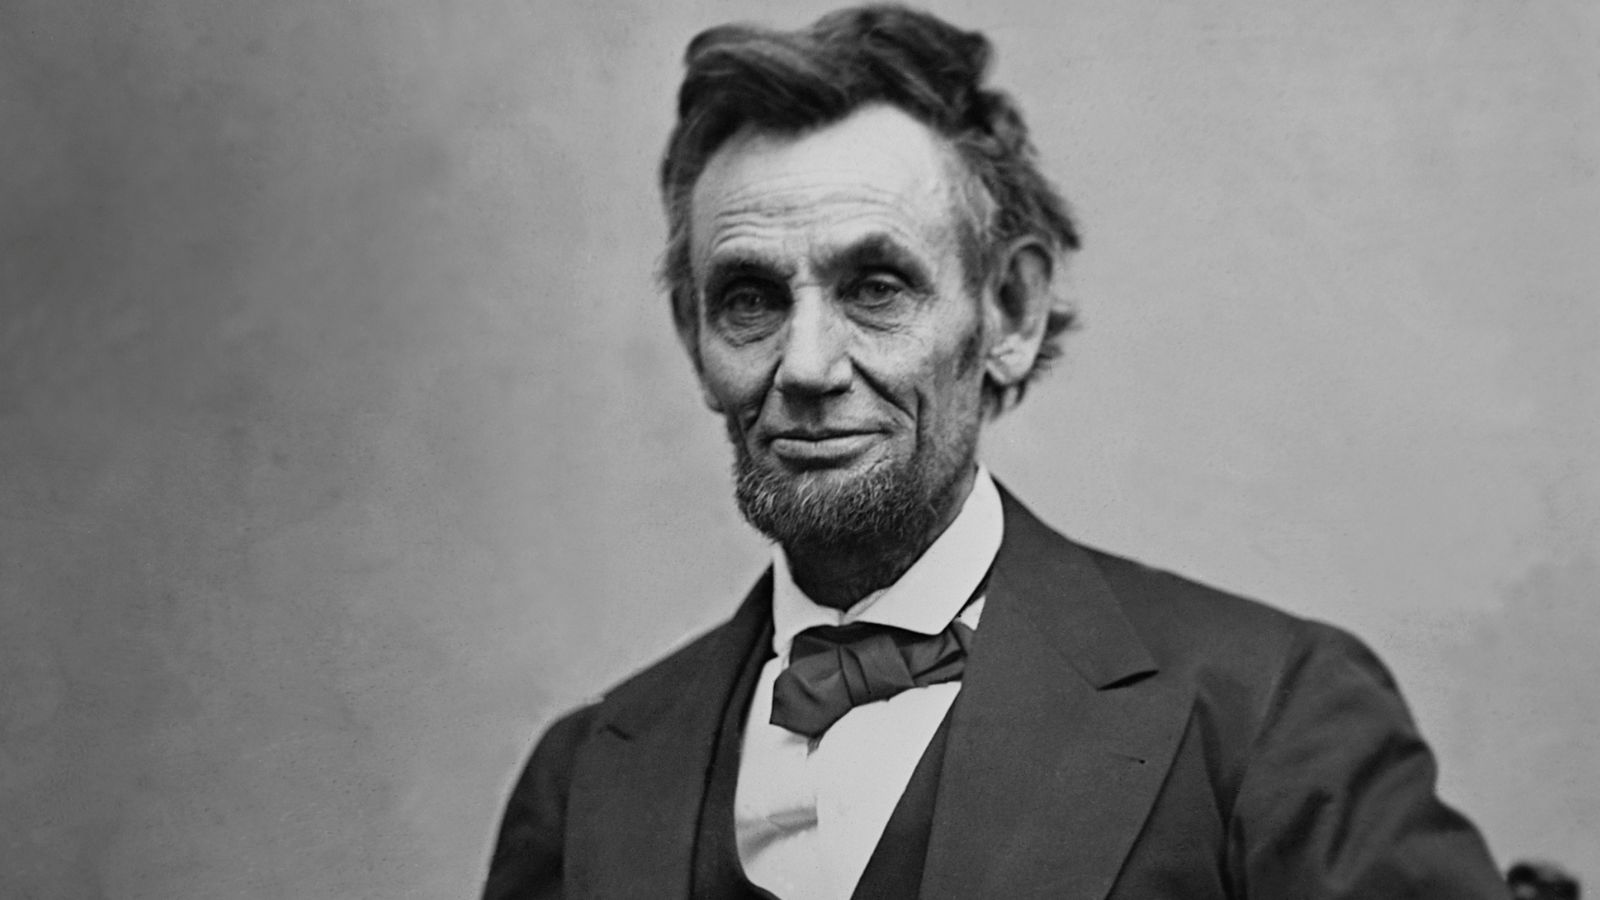 <p>“Your purpose, then, plainly stated, is that you will destroy the Government, unless you be allowed to construe and enforce the Constitution as you please, on all points in dispute between you and us. You will rule or ruin in all events.”</p><p>Delivered a few months before the Republican nominating convention, Lincoln’s address at New York City’s Cooper Union is considered a pivotal factor in securing his nomination victory. Among Lincoln’s lengthier speeches, it extensively articulated his perspectives on the predominant issues of the era – slavery and secession. With a compelling and lucid presentation, he skillfully aligned his views with those of the Founding Fathers, leaving an indelible mark on the political landscape.</p>